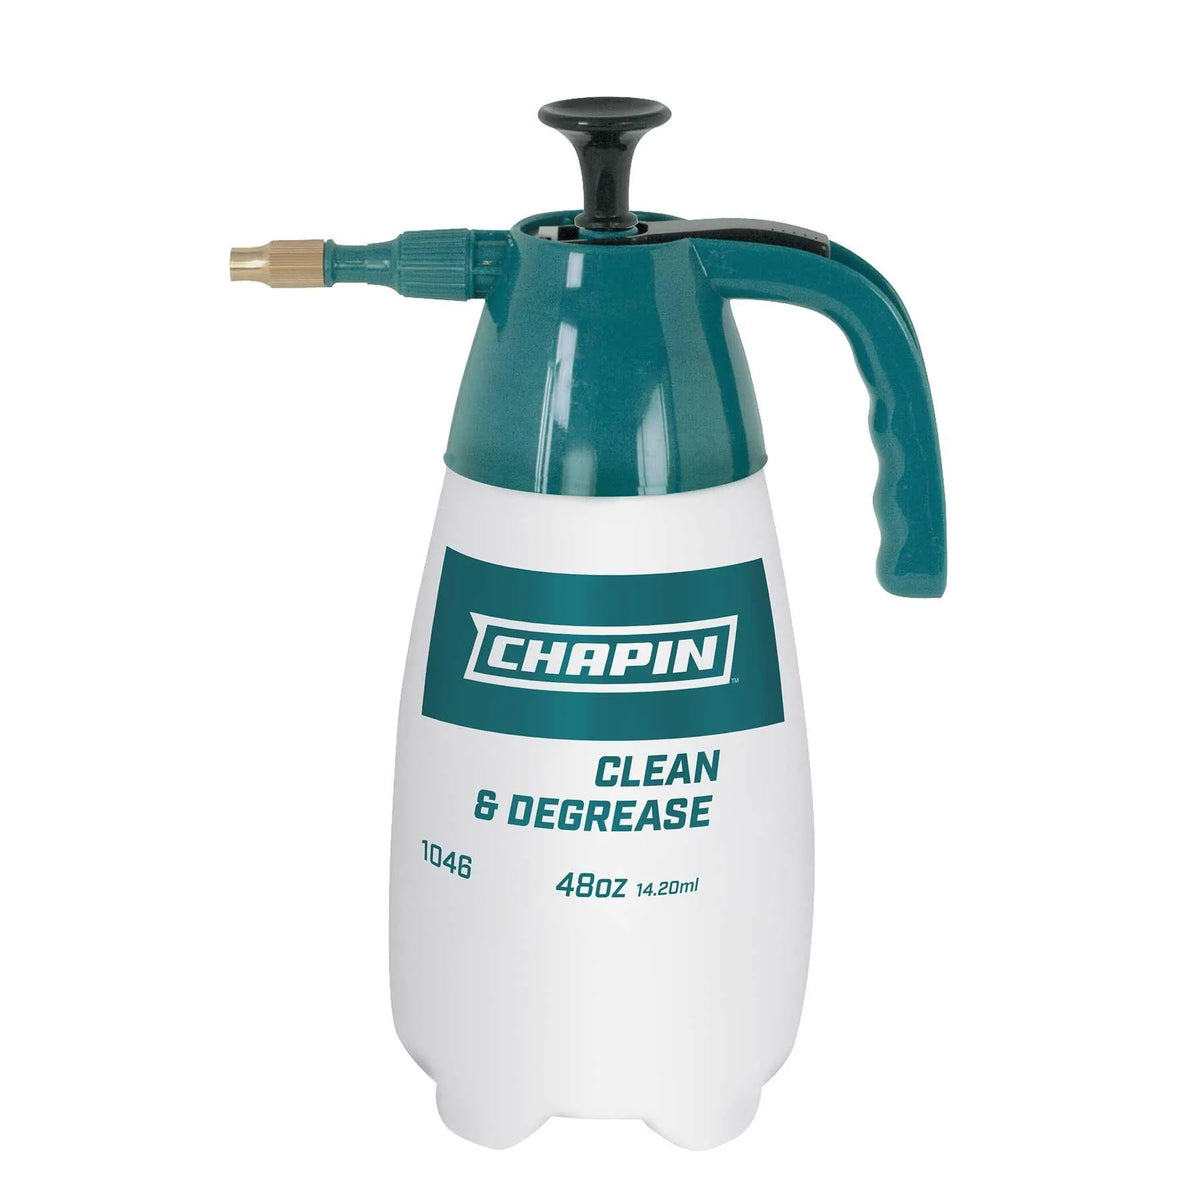 Chapin 1046: 48-ounce Industrial Cleaner/Degreaser Handheld Pump Spray –  Chapin International